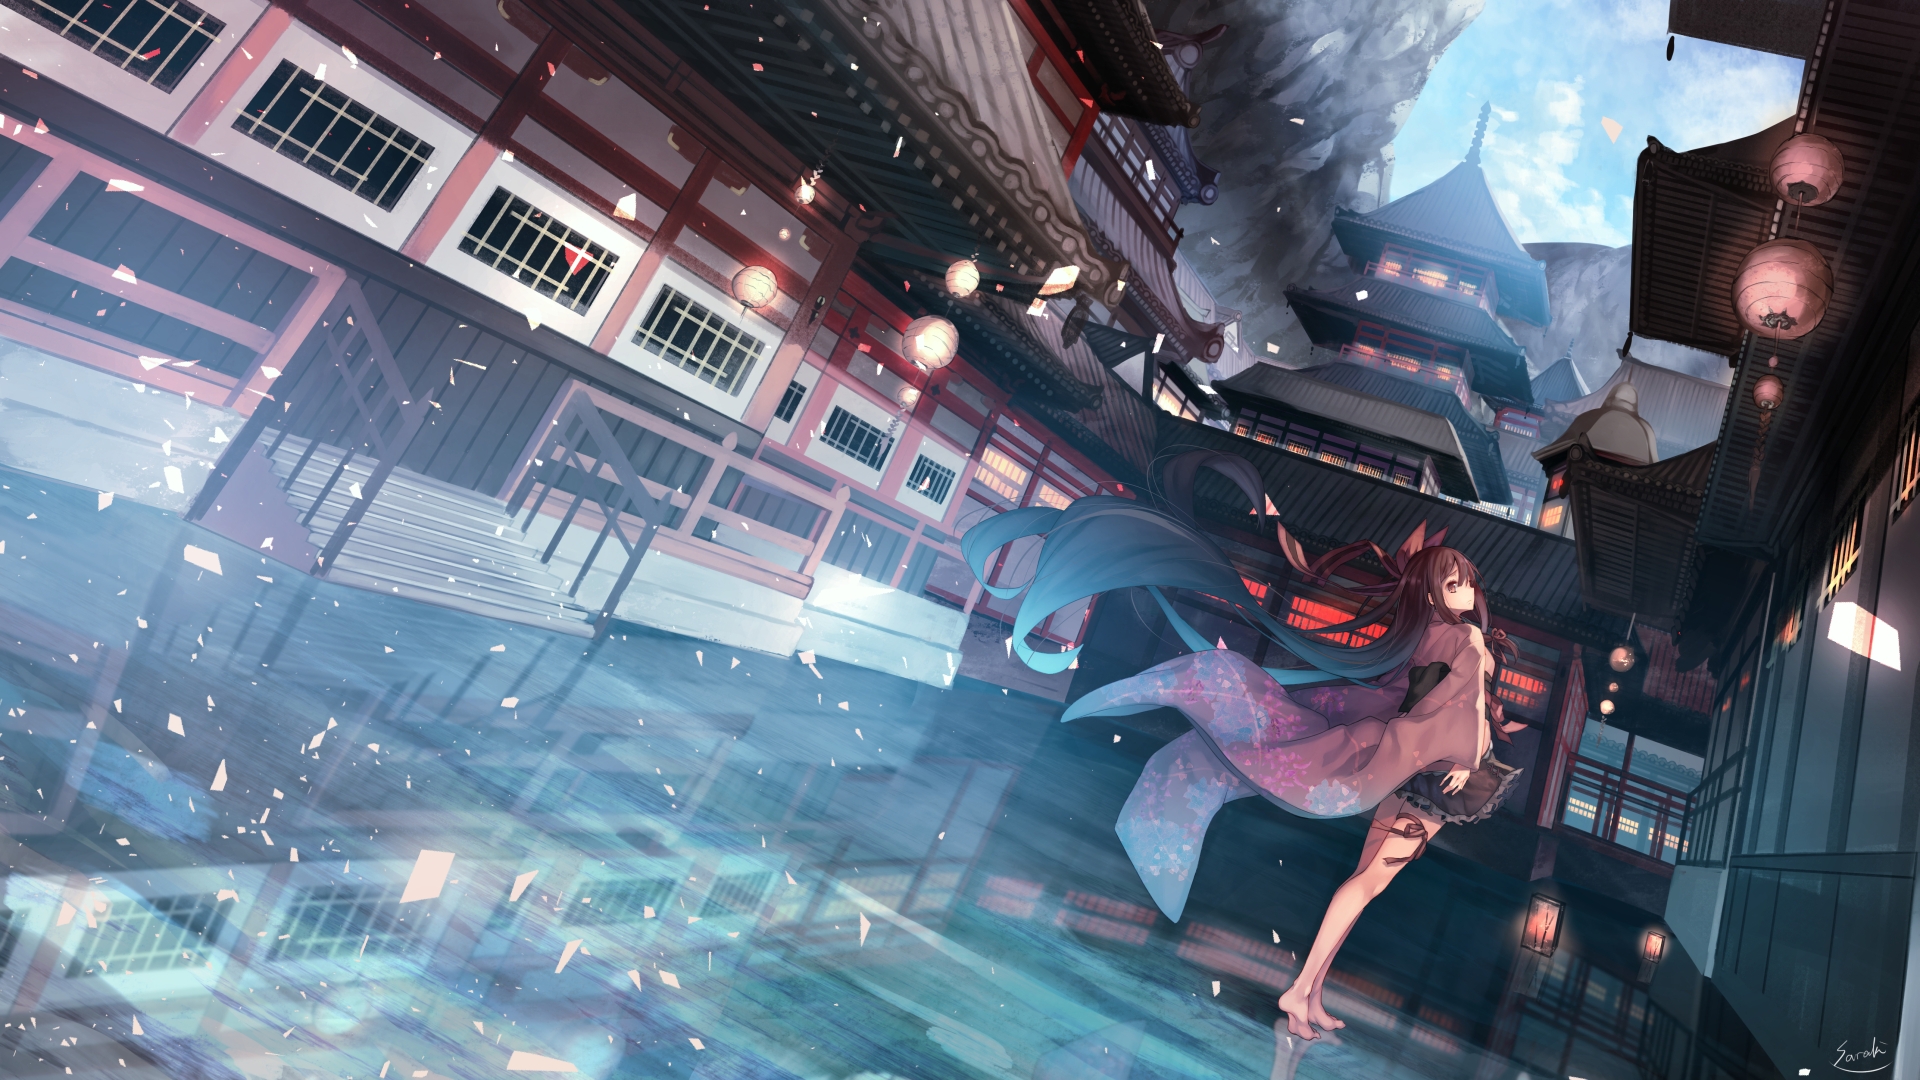 Download 1920x1080 Anime Girl, Japanese Buildings